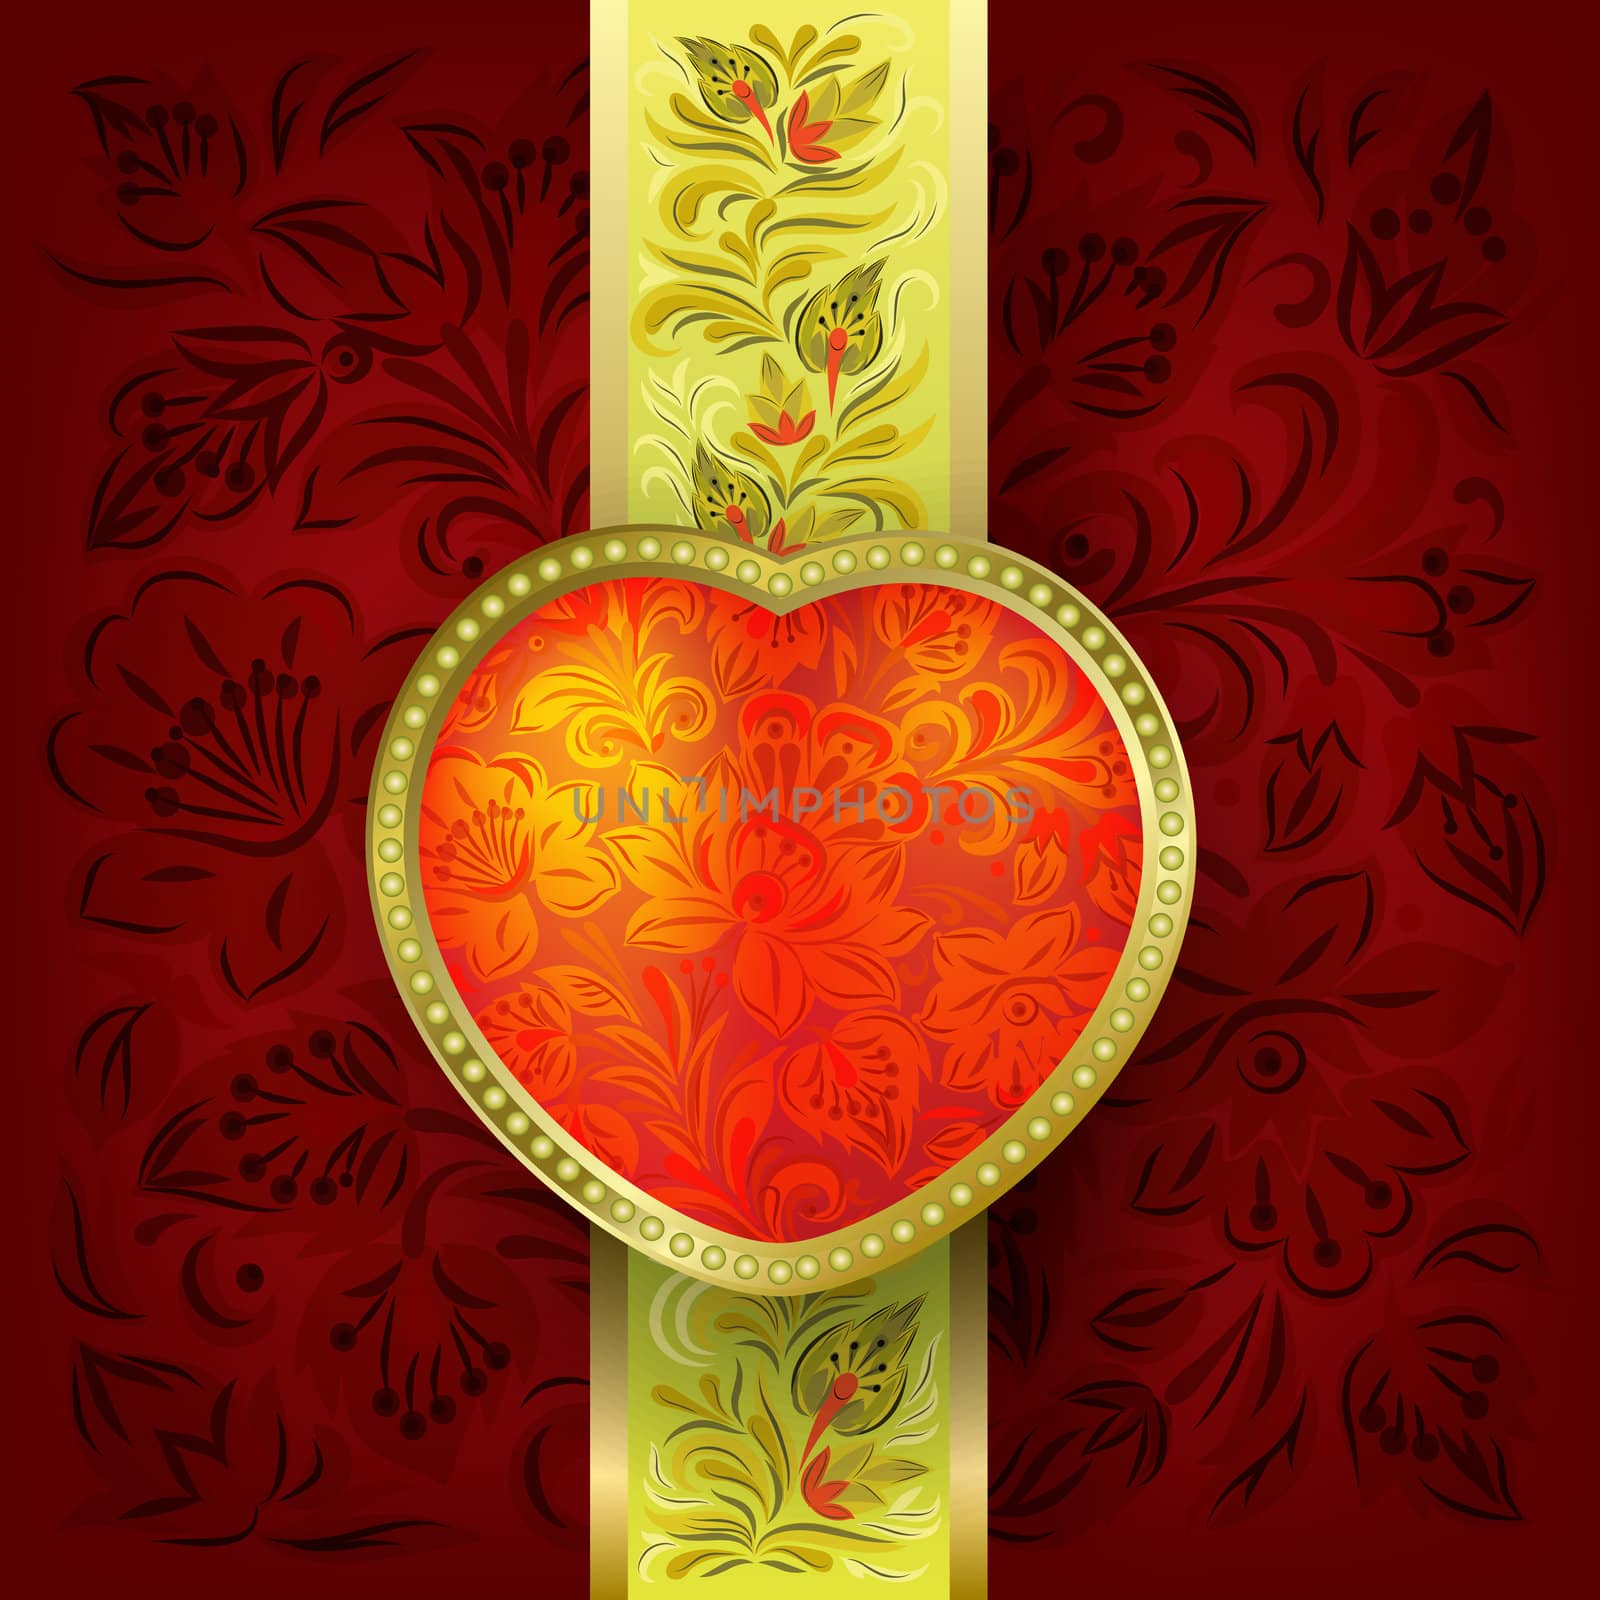 Valentines greeting with heart on red floral ornament